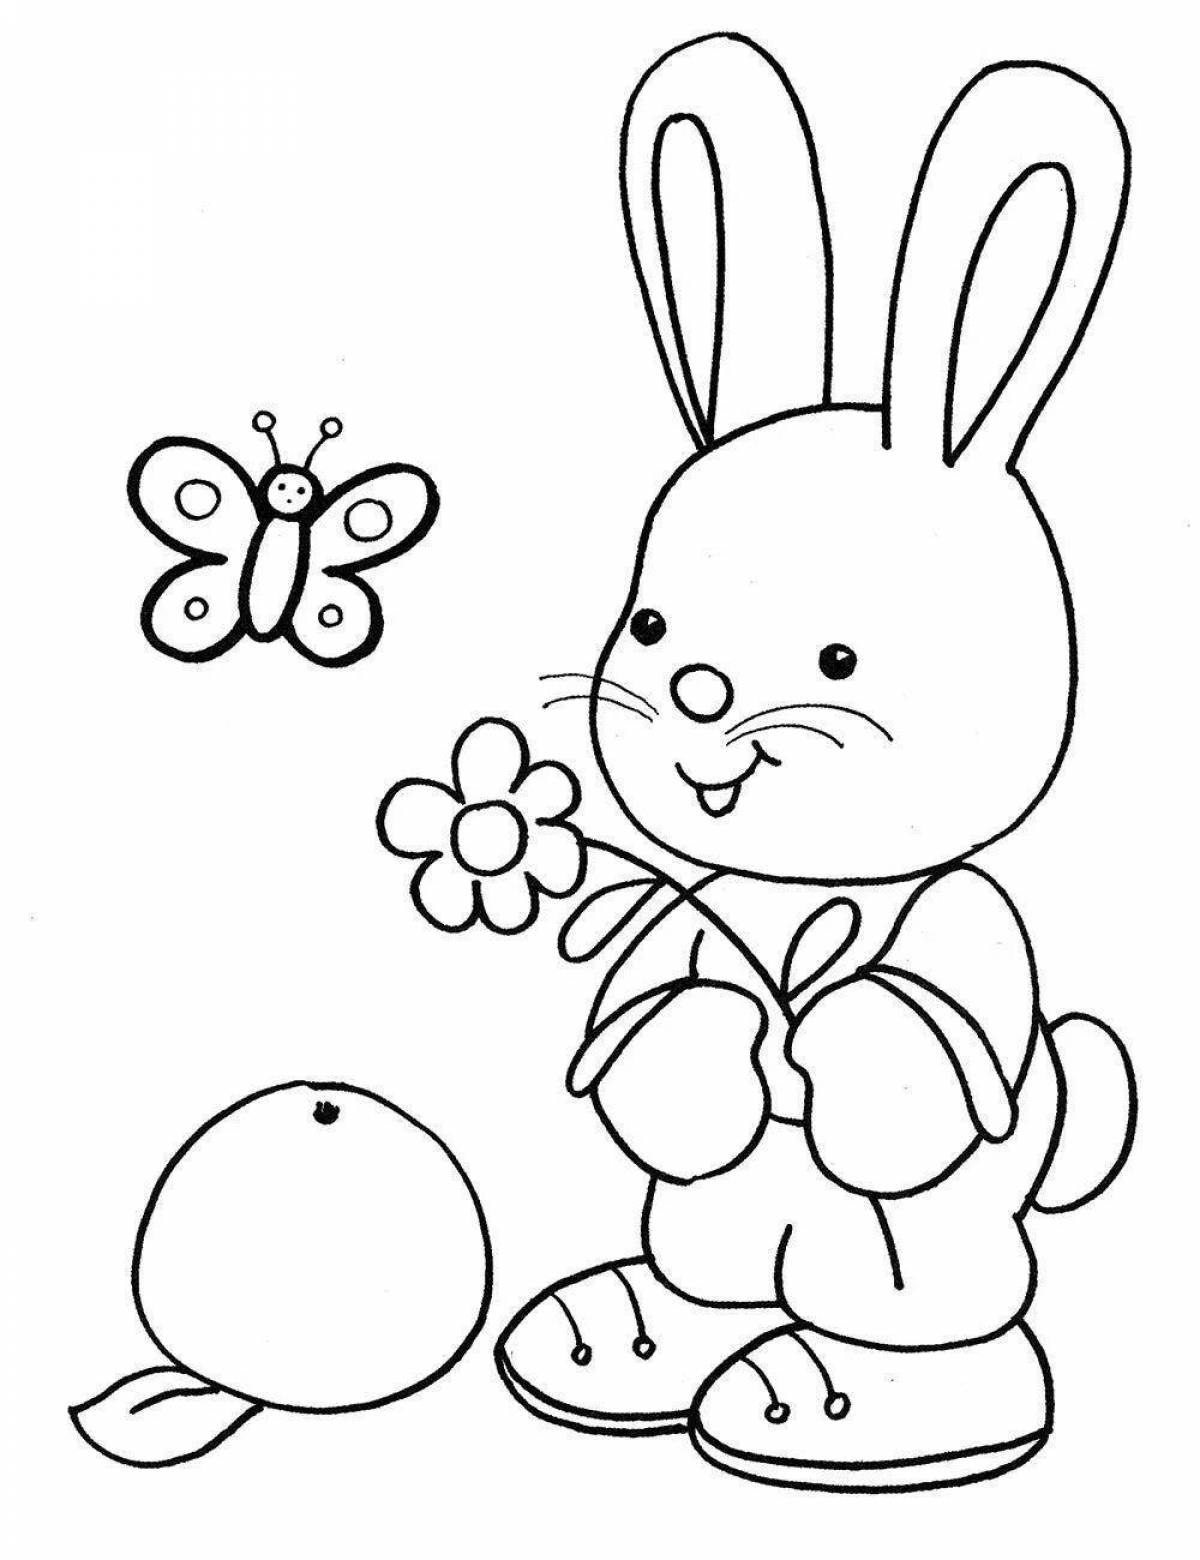 Creative coloring for children 3 4